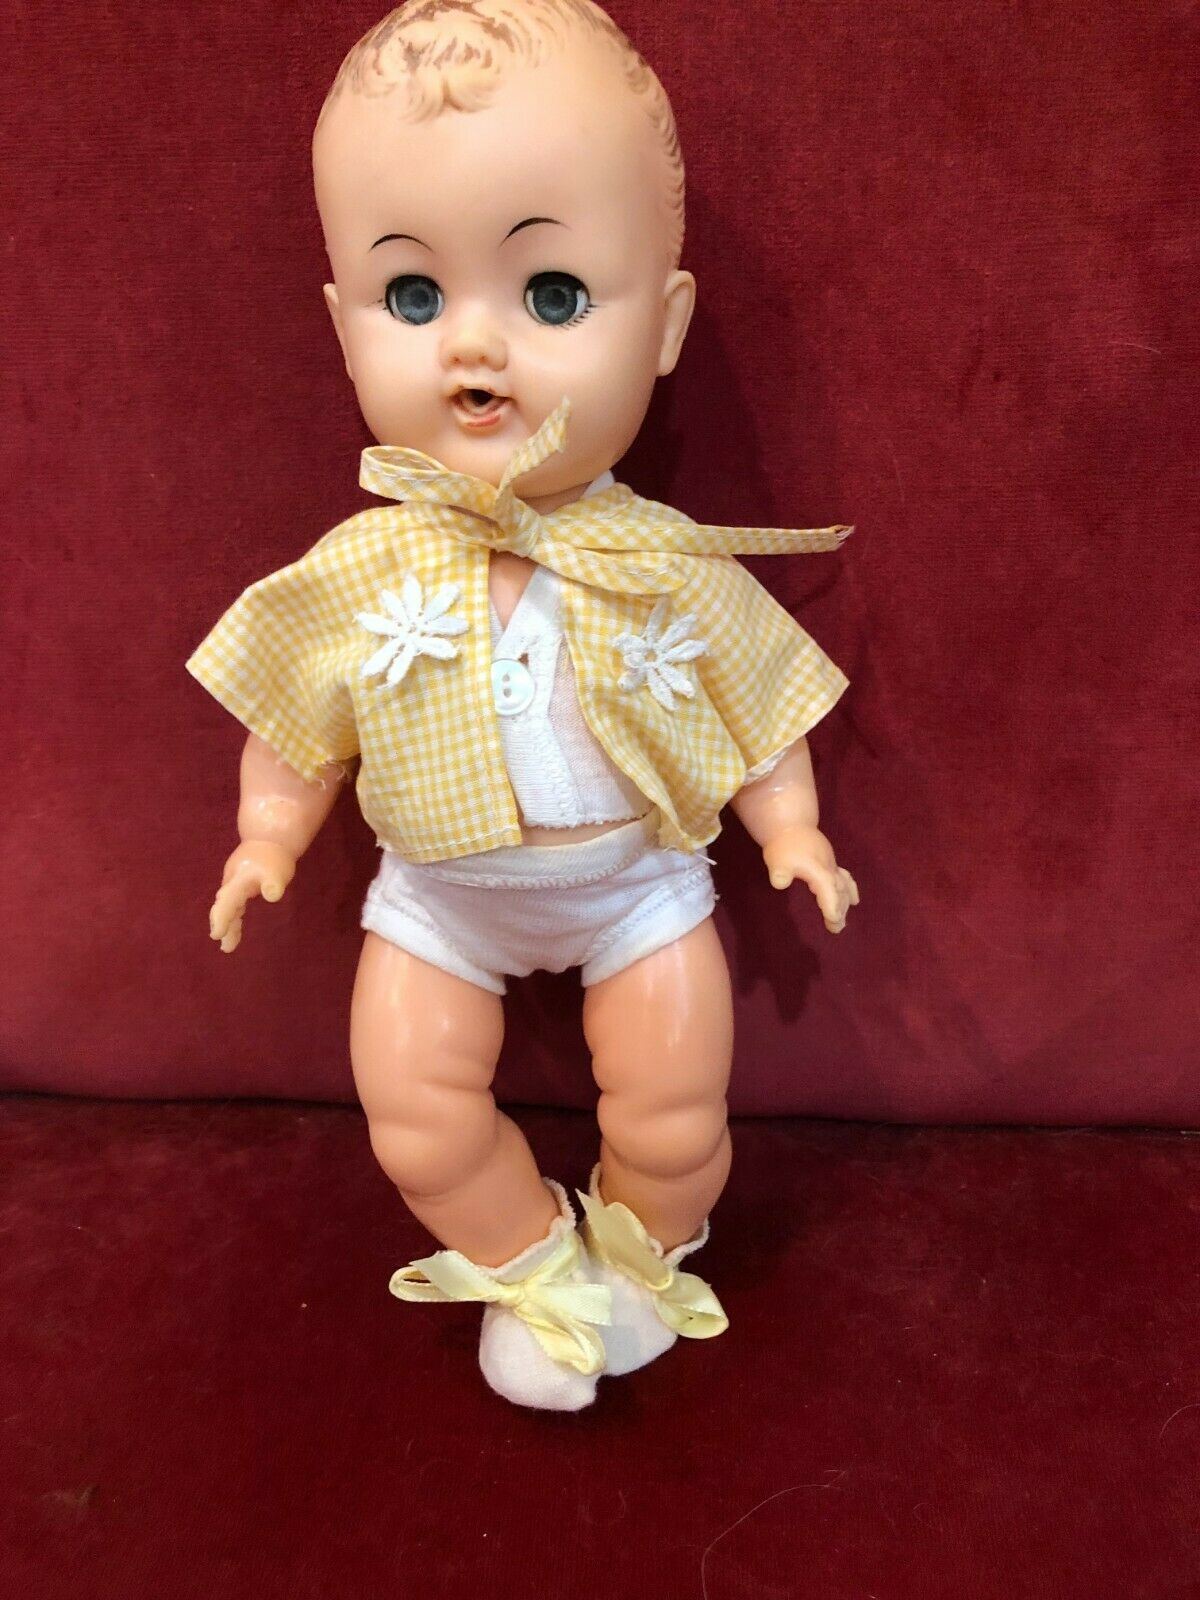 1959 Betsy Wetsy 12" Ideal Doll Molded Hair Markings Wc-1-1 Squeaker Works Rare